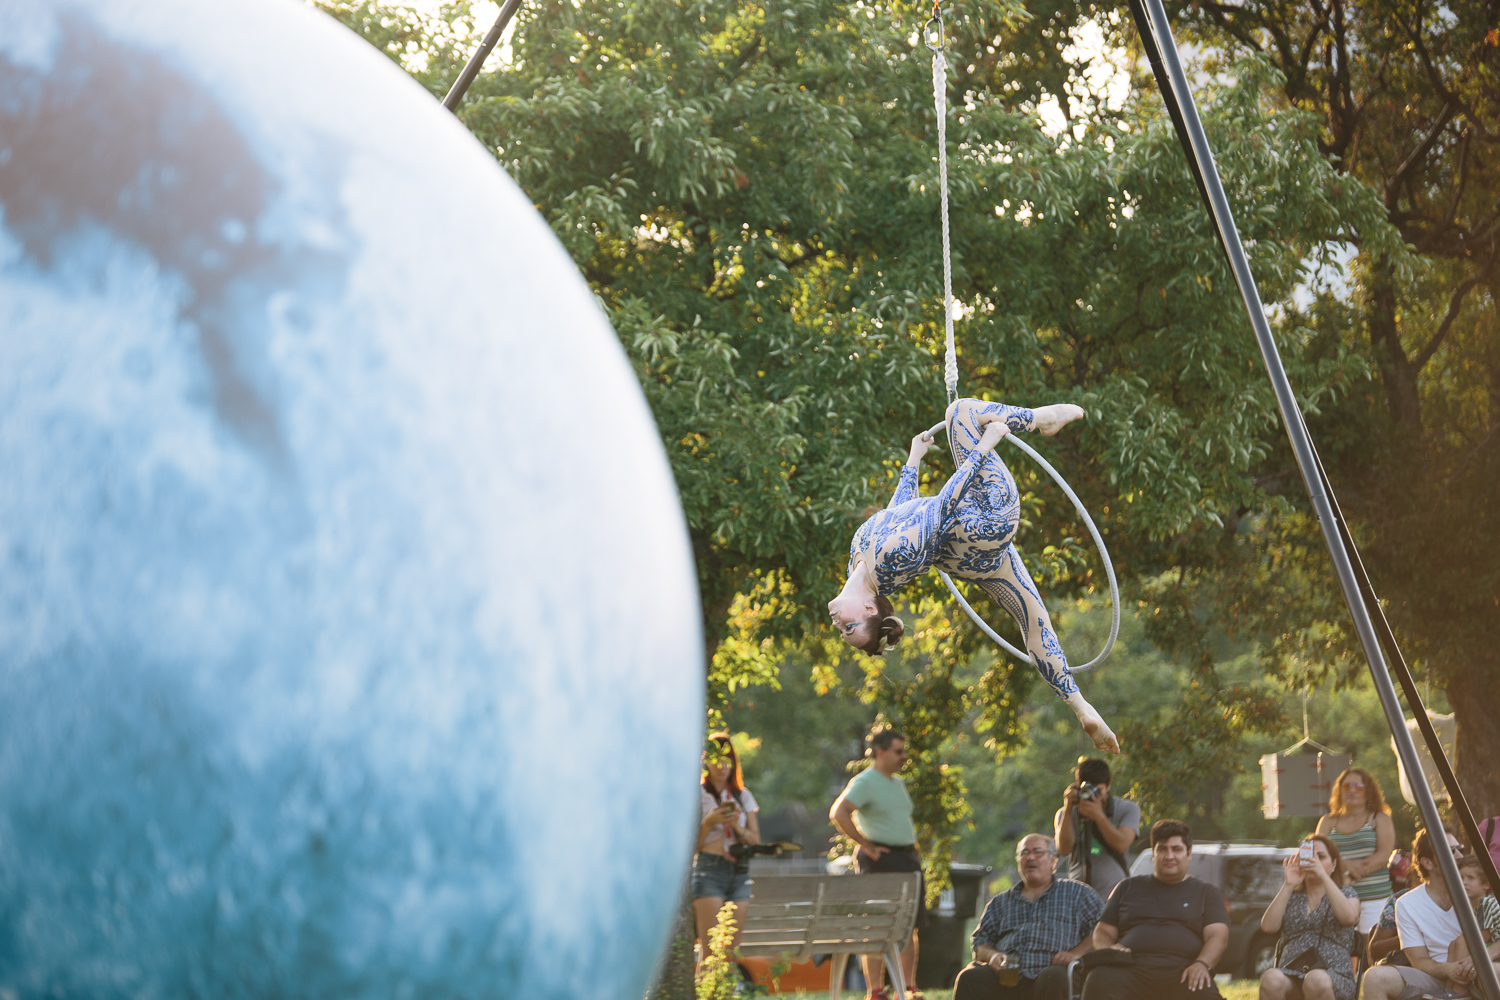 A large blue sphere sits in the foreground while a woman dances in a hanging hoop in the background.